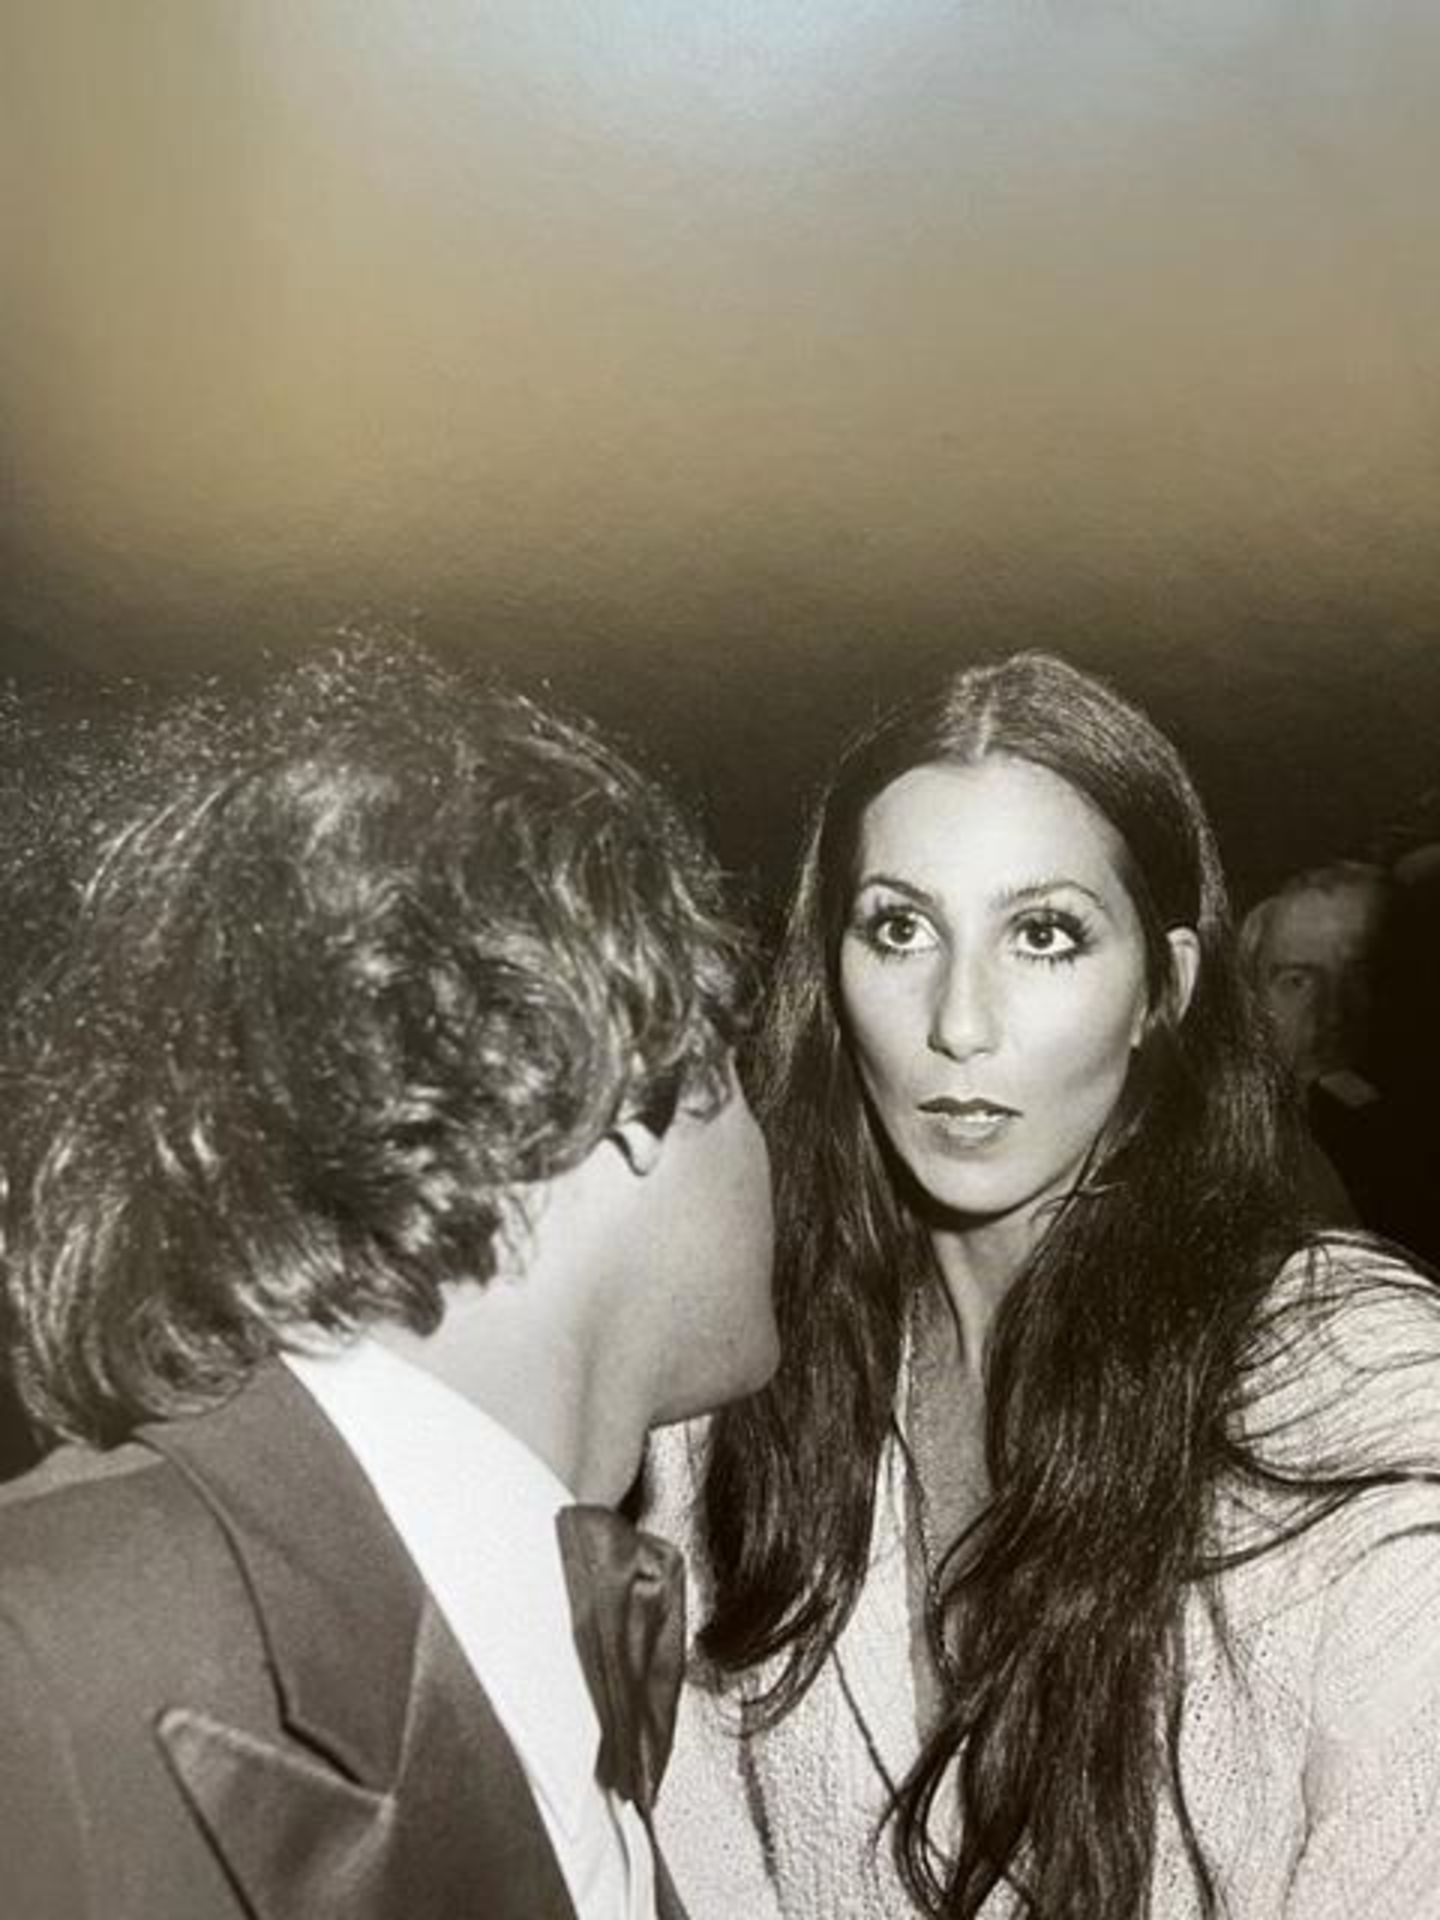 Ian Schrager "Cher with Steve" Print. - Image 6 of 6